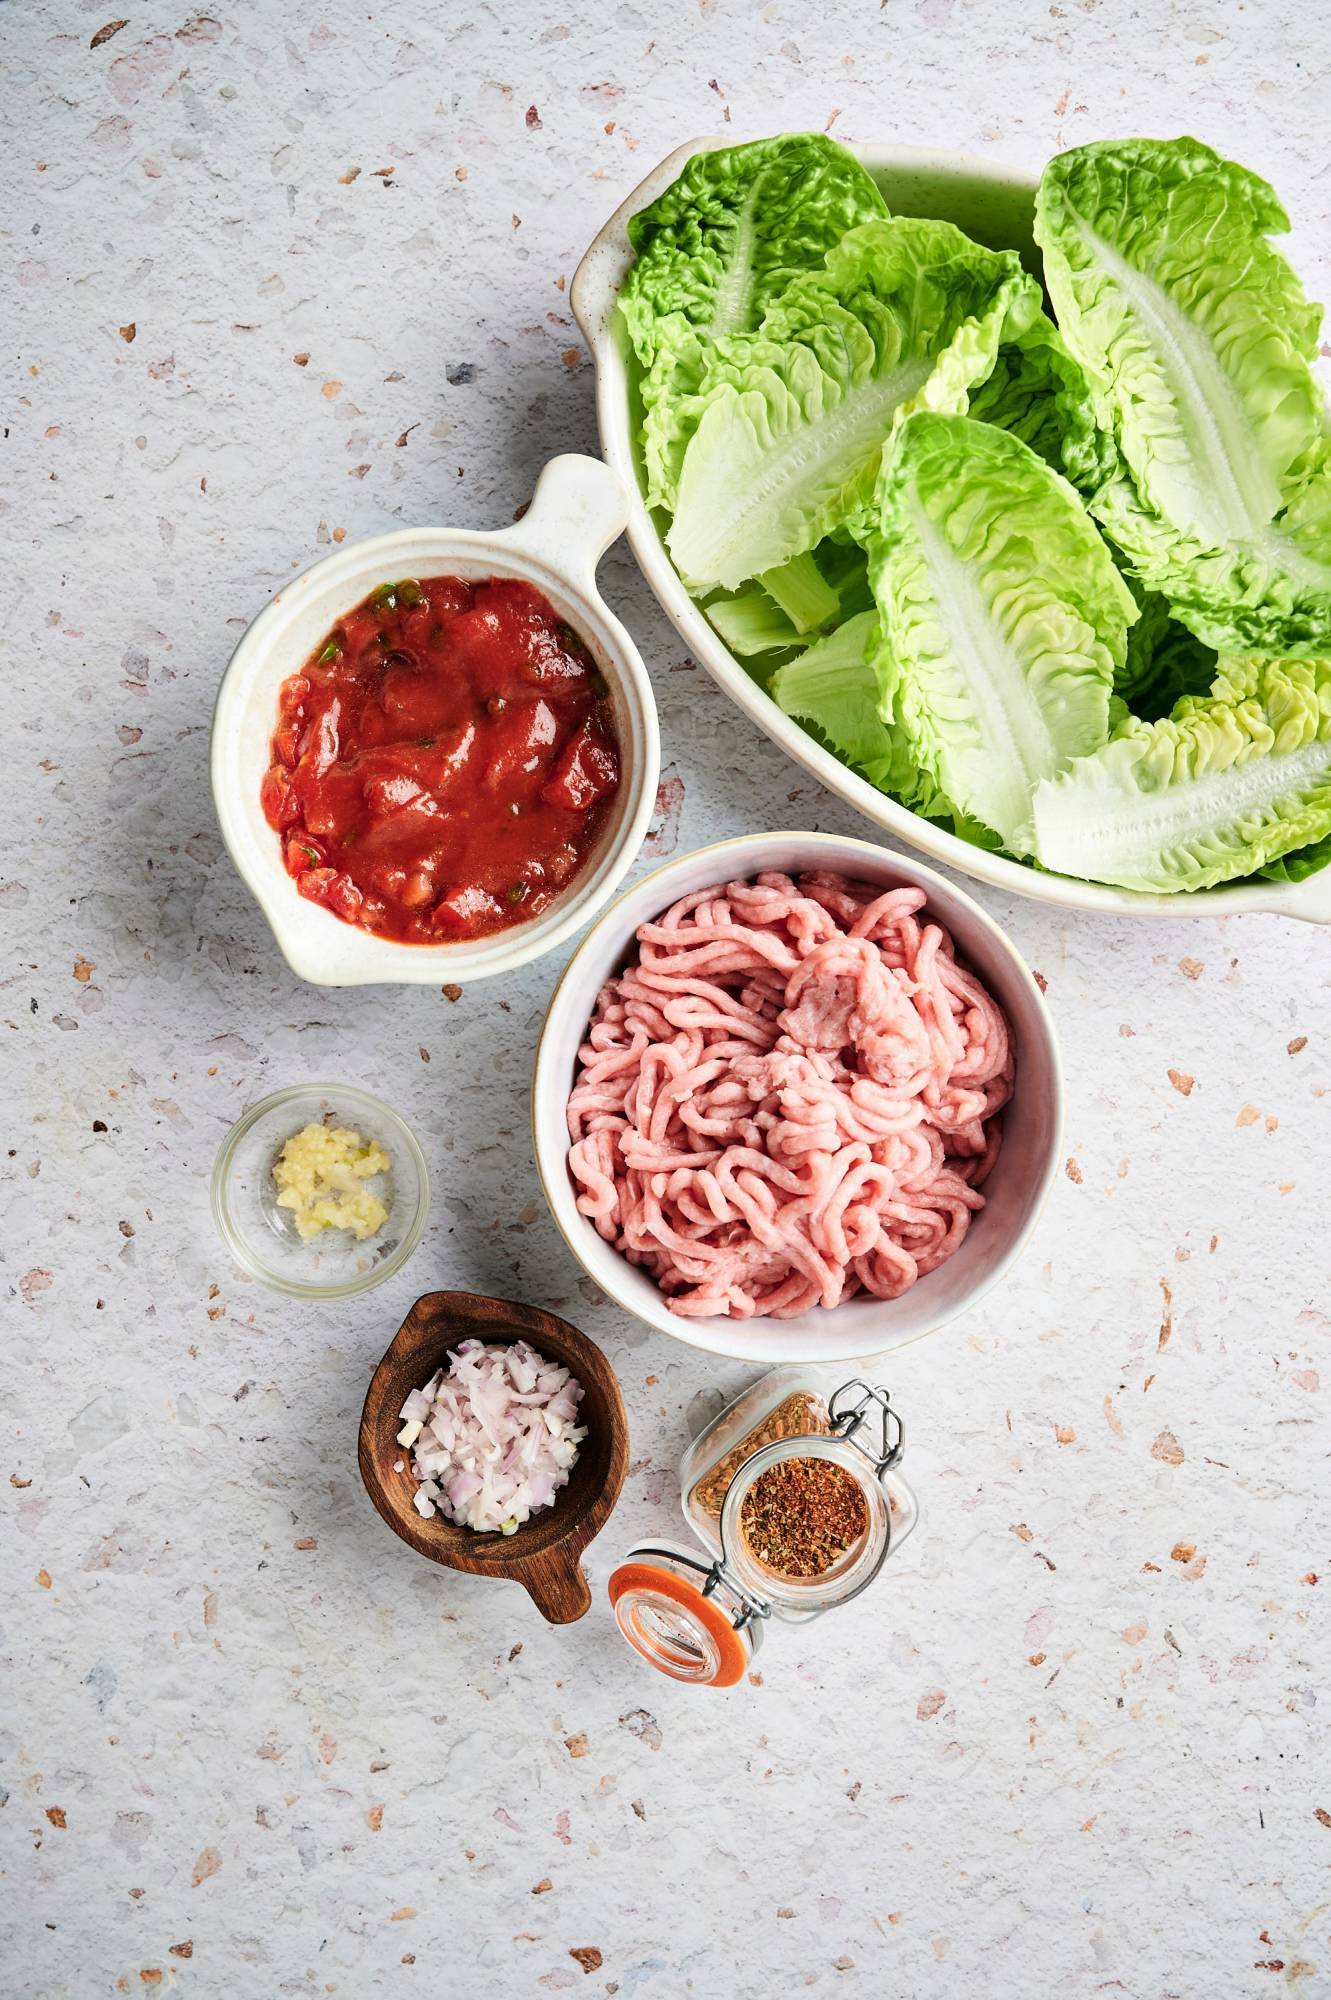 Ingredients for turkey taco lettuce wraps including ground turkey, onion, garlic, taco seasoning, lettuce leaves, and diced tomatoes.